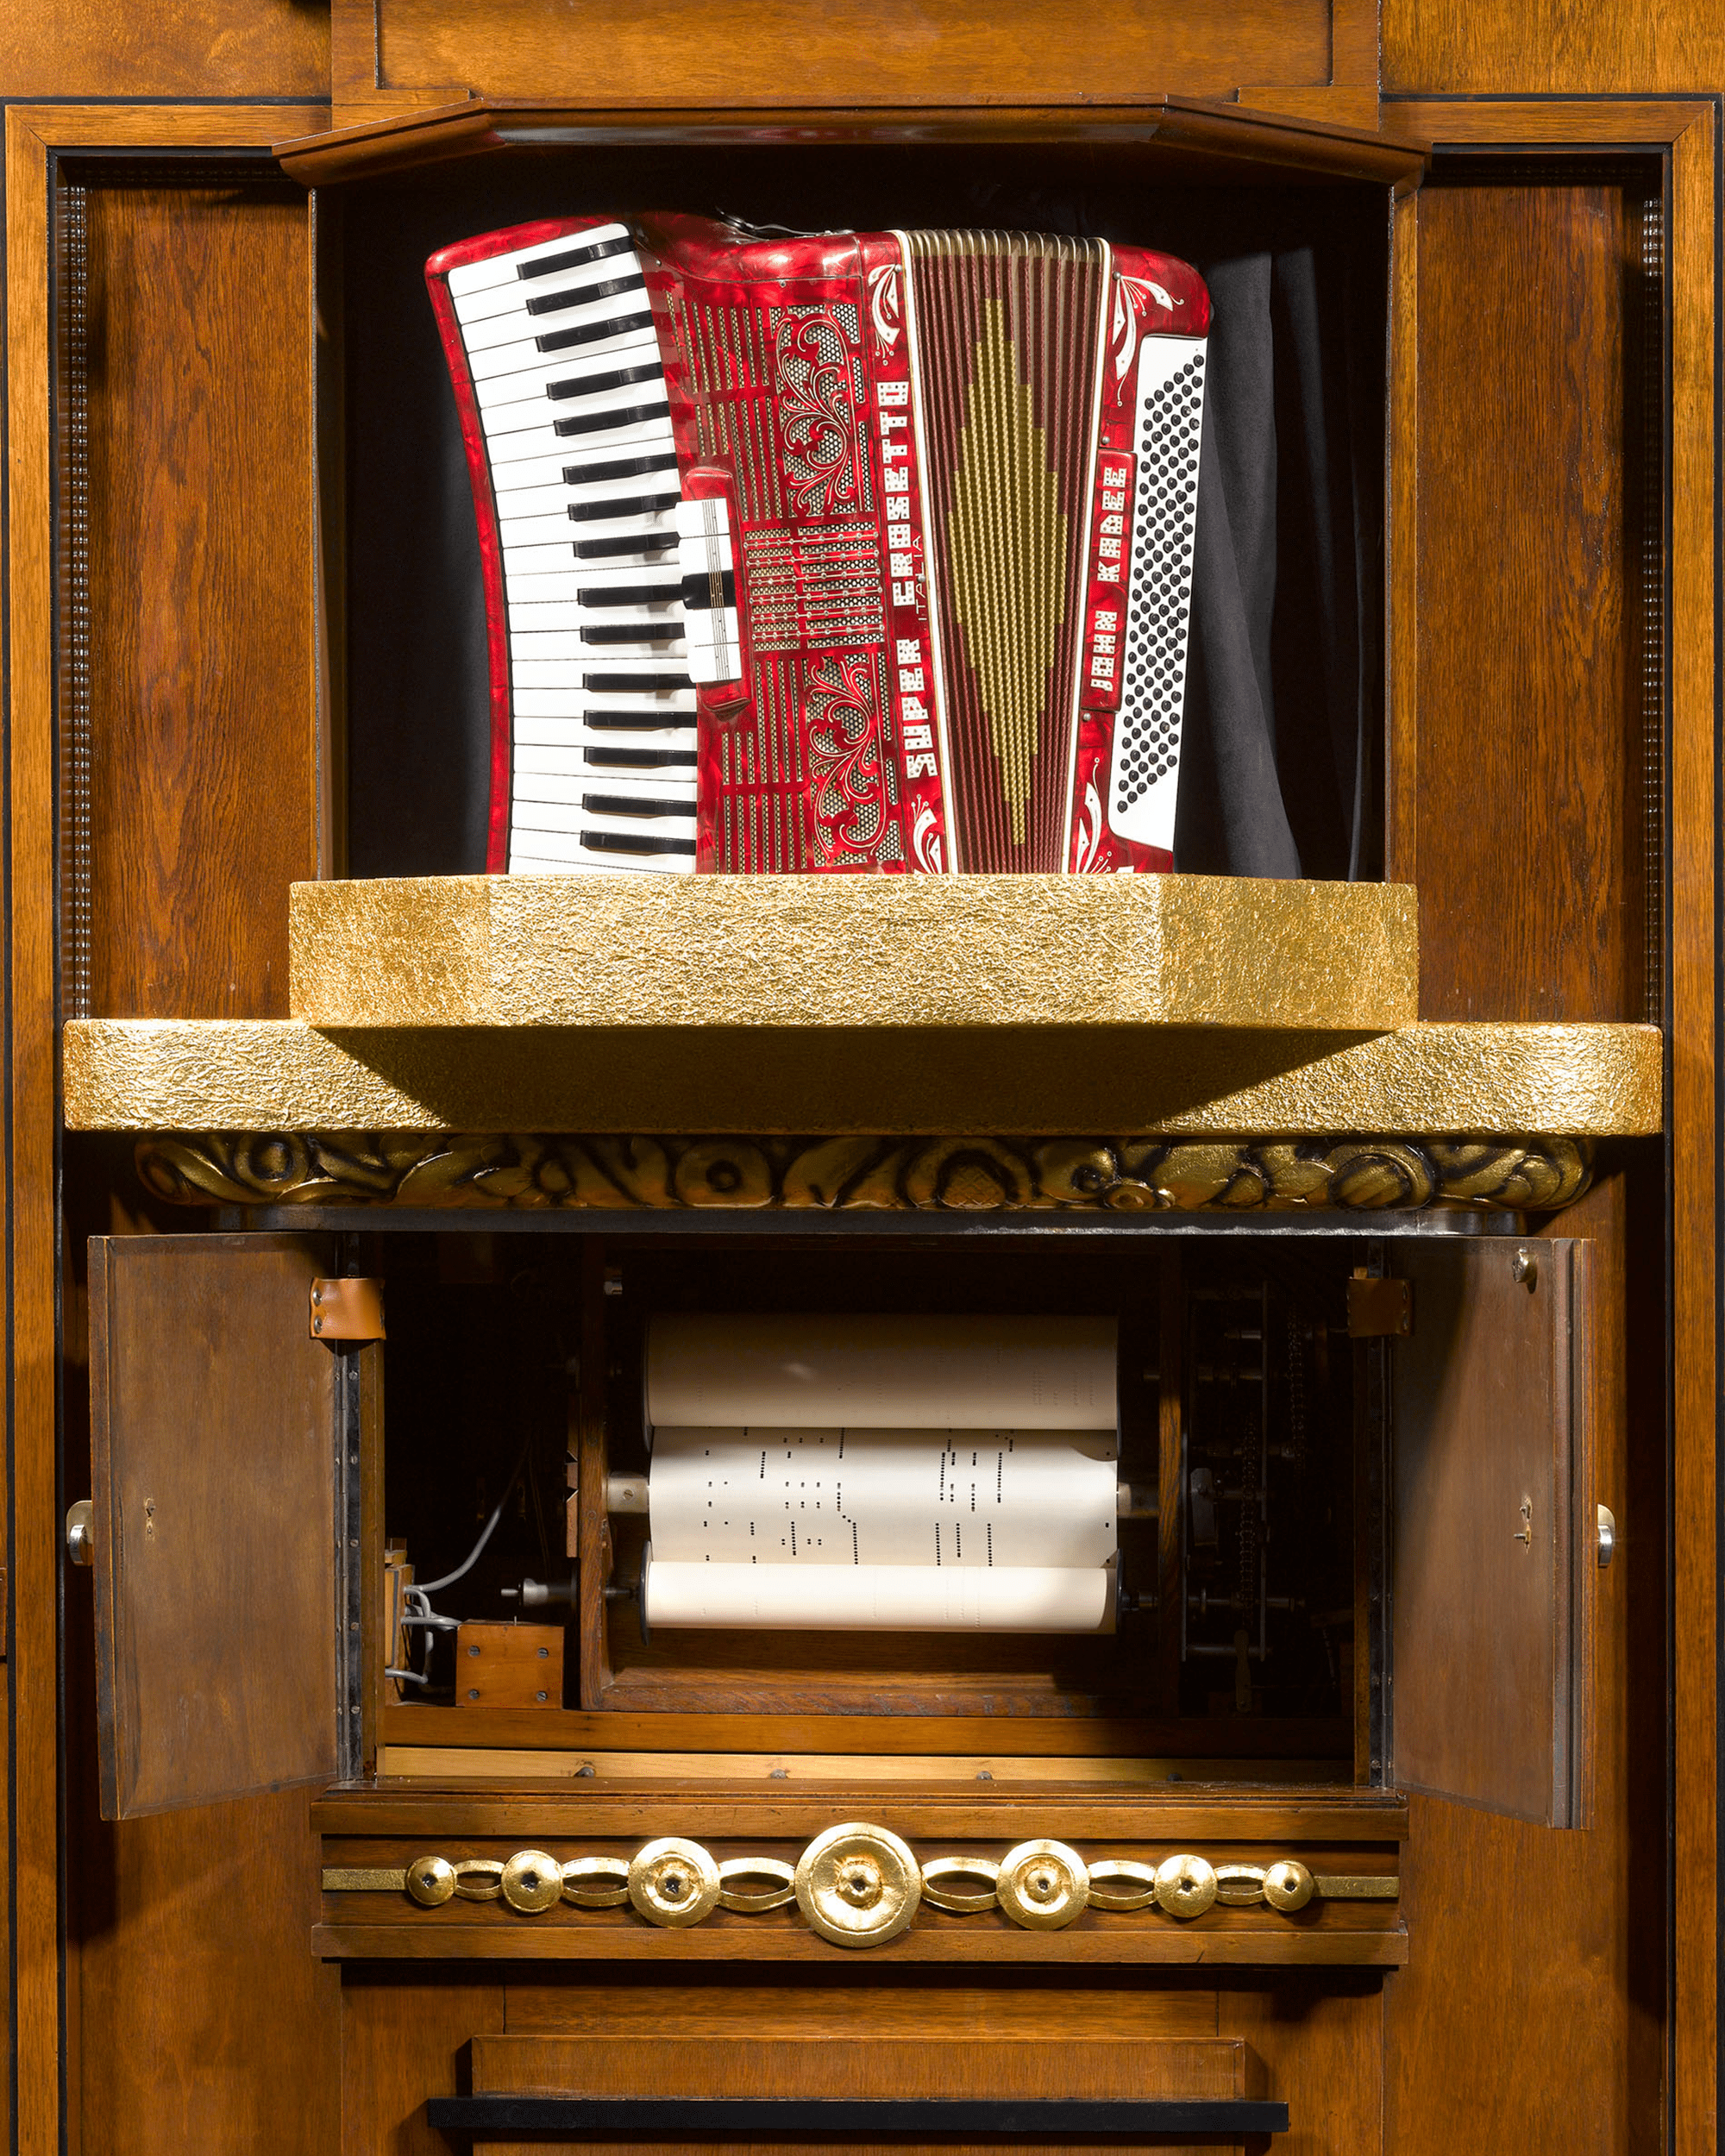 Stand-alone instruments, including drums, triangle and an accordion, are integrated in the mechanism